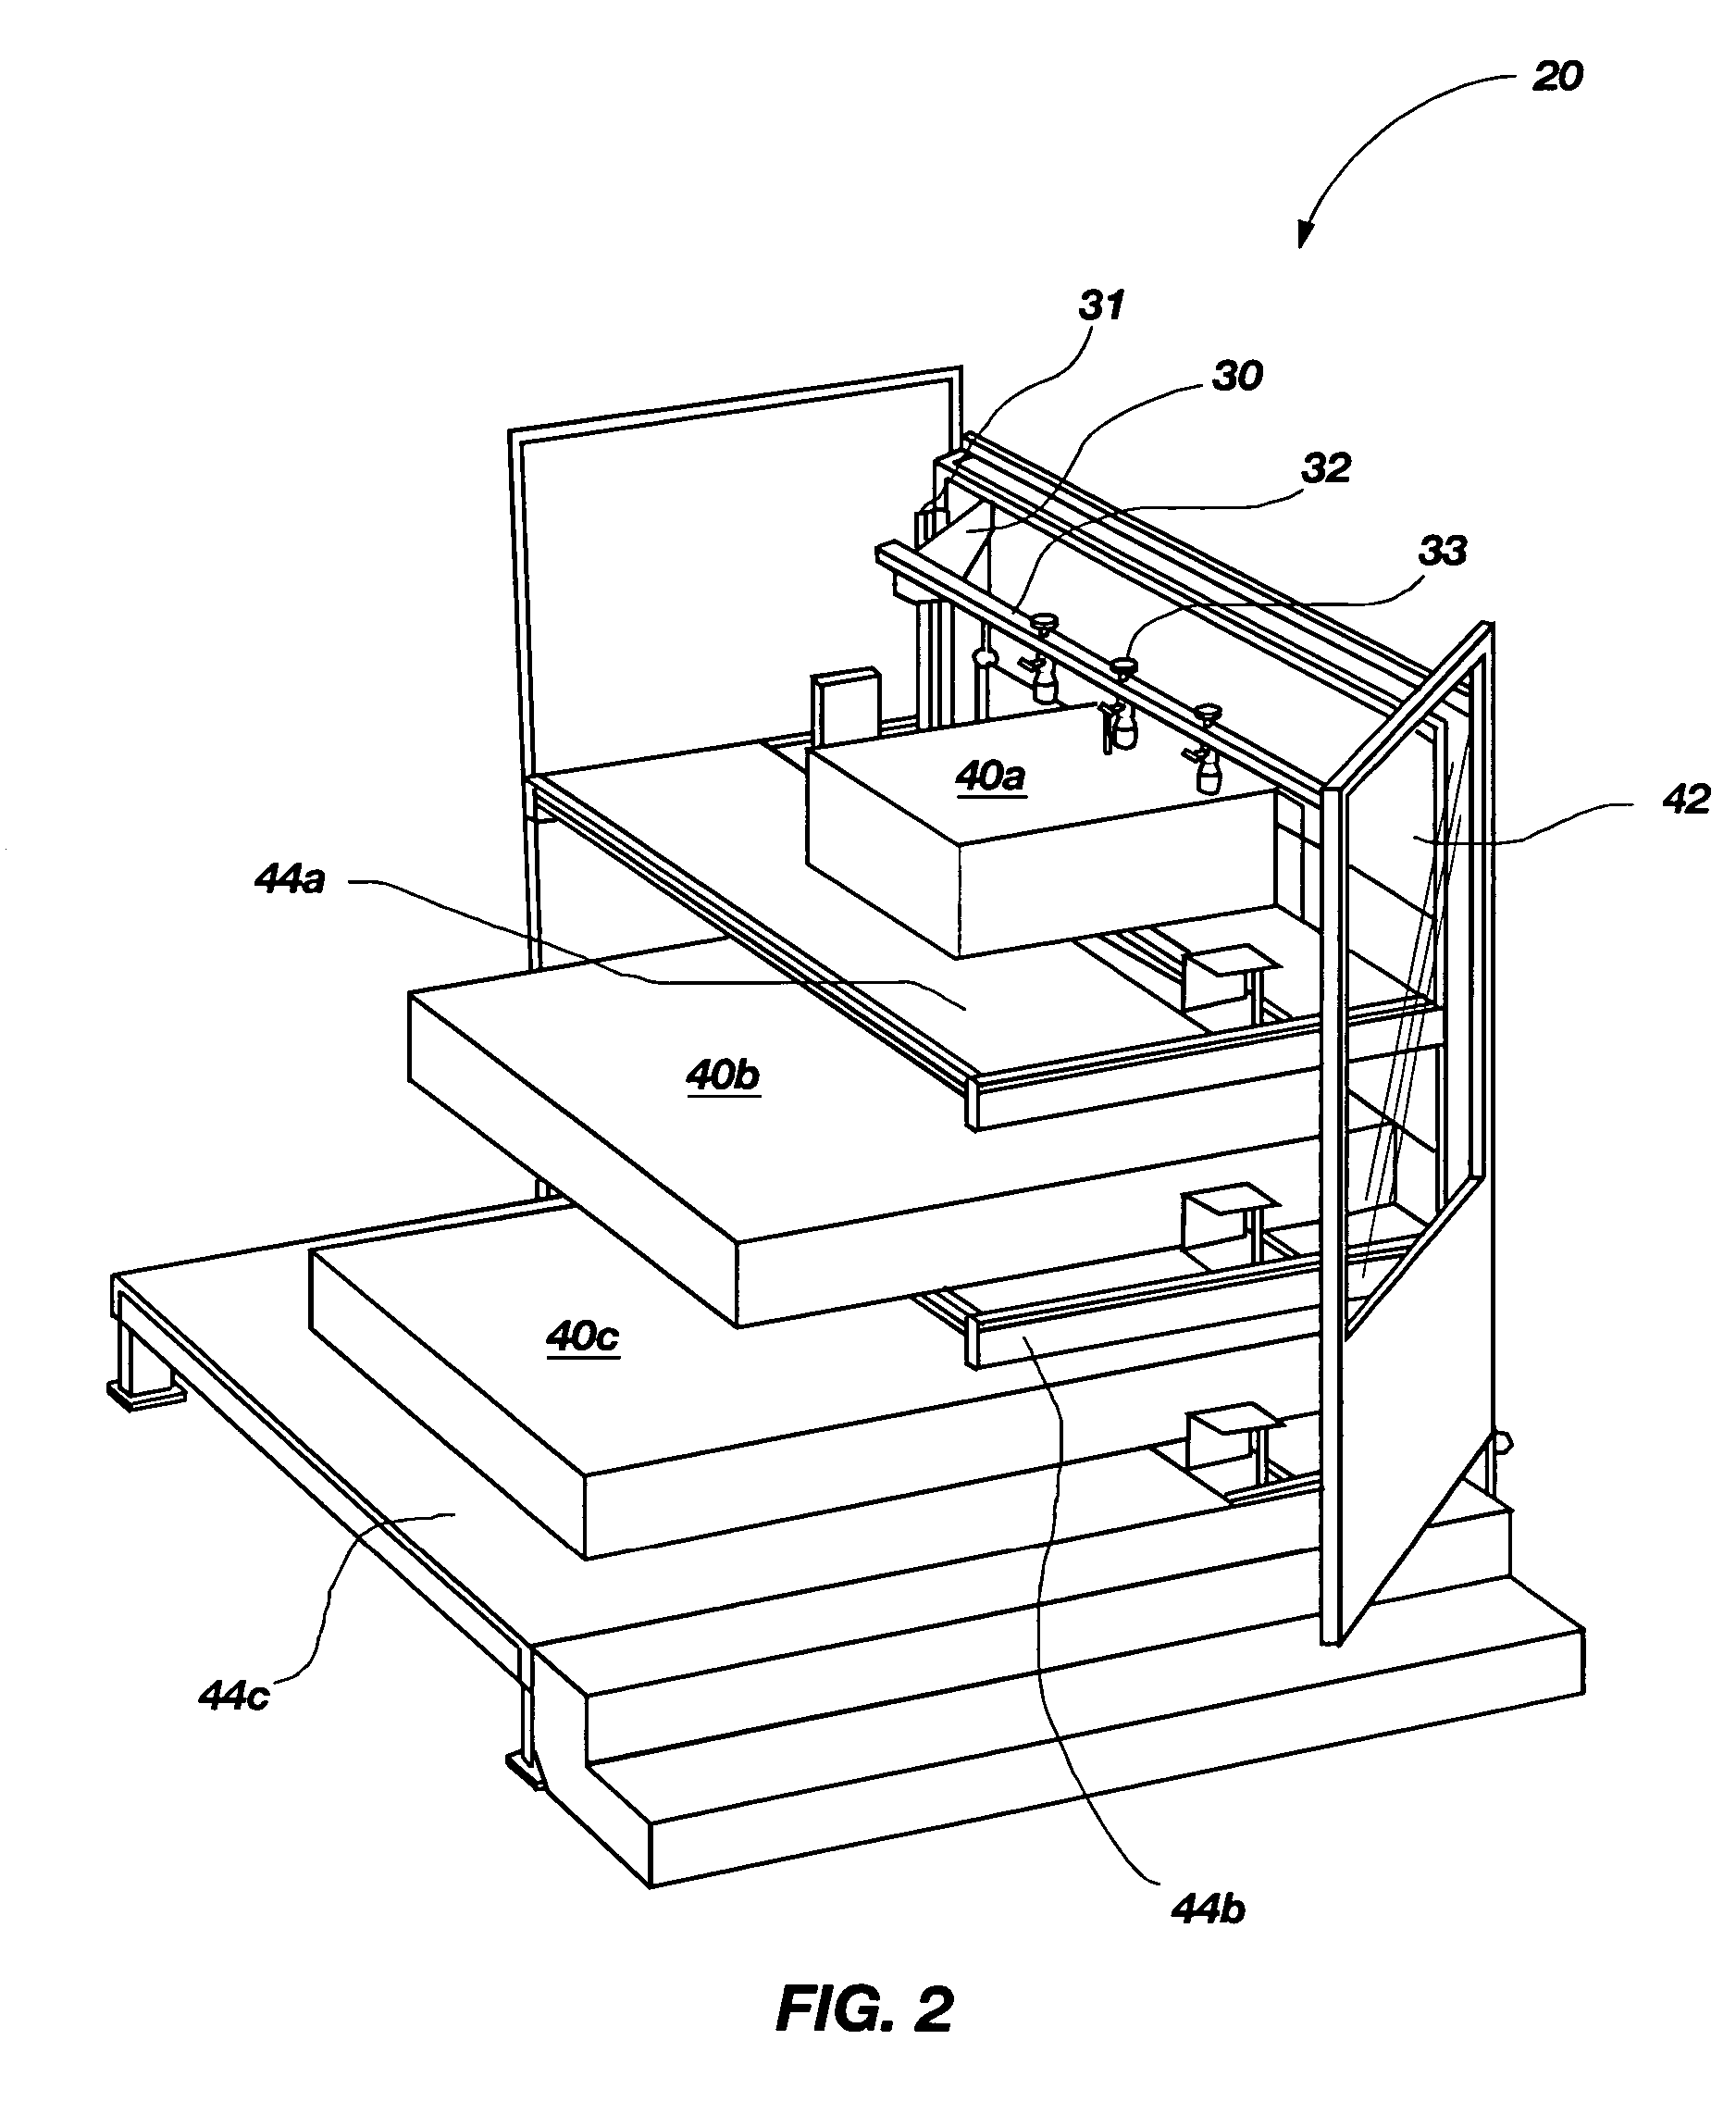 Programmable load forming system, components thereof, and methods of use